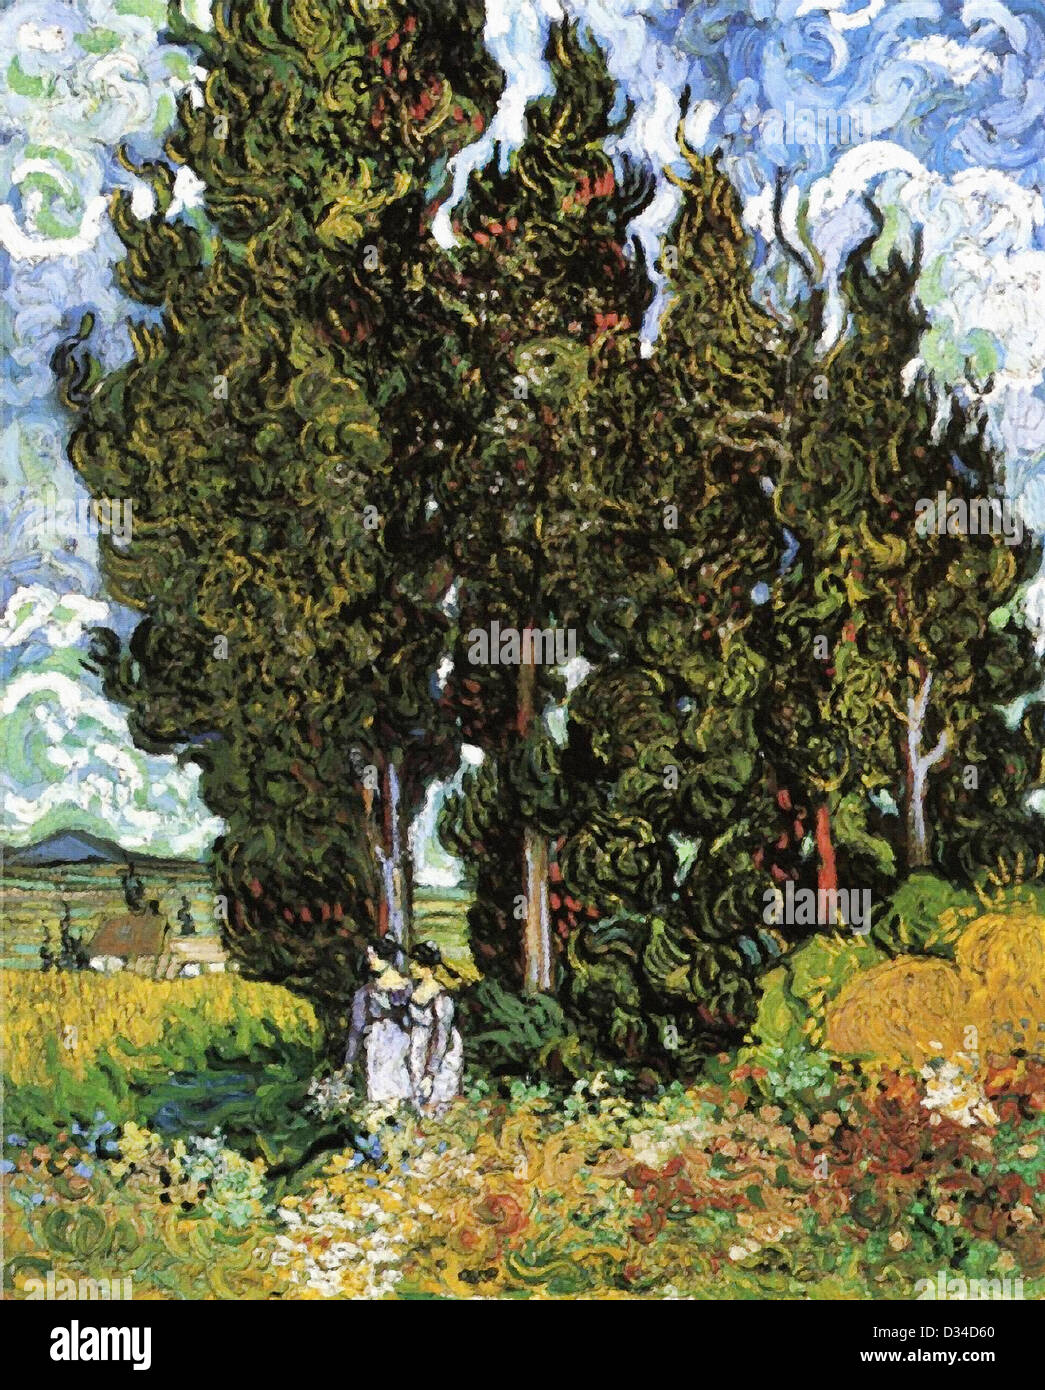 Vincent van Gogh, Cypresses with Two Women. 1889. Post-Impressionism. Oil on canvas. Rijksmuseum Kröller-Müller, Otterlo Stock Photo